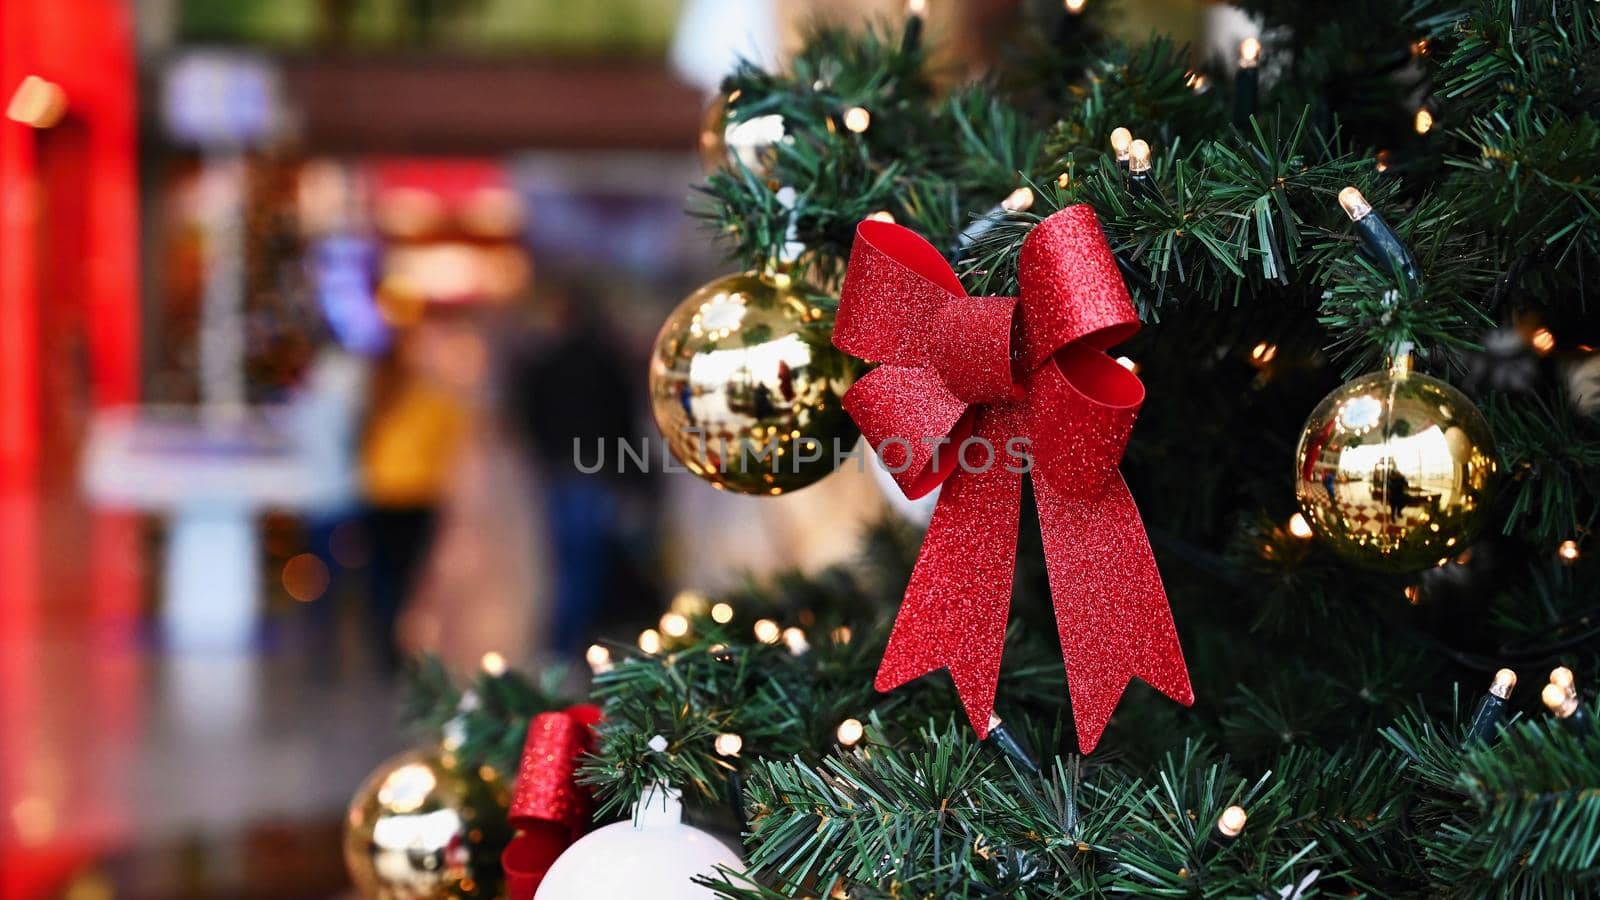 Colorful christmas Decoration. Winter holidays and traditional ornaments on a Christmas tree. Lighting chains - candles for seasonal background.